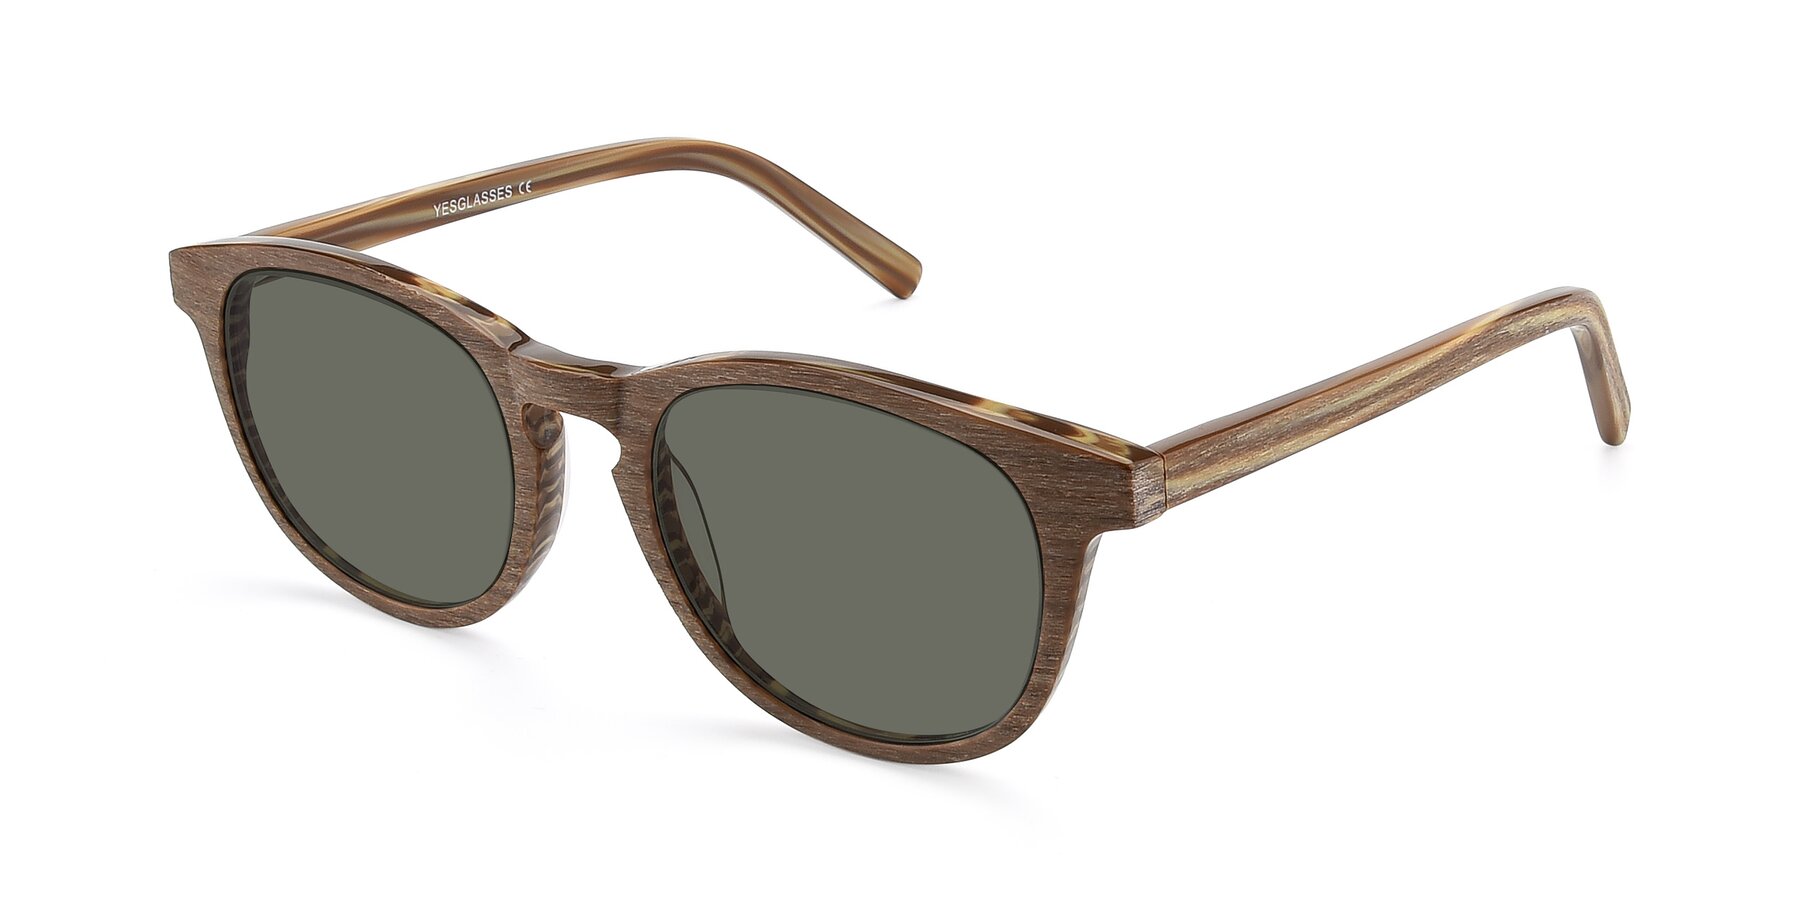 Angle of SR6044 in Brown-Wooden with Gray Polarized Lenses